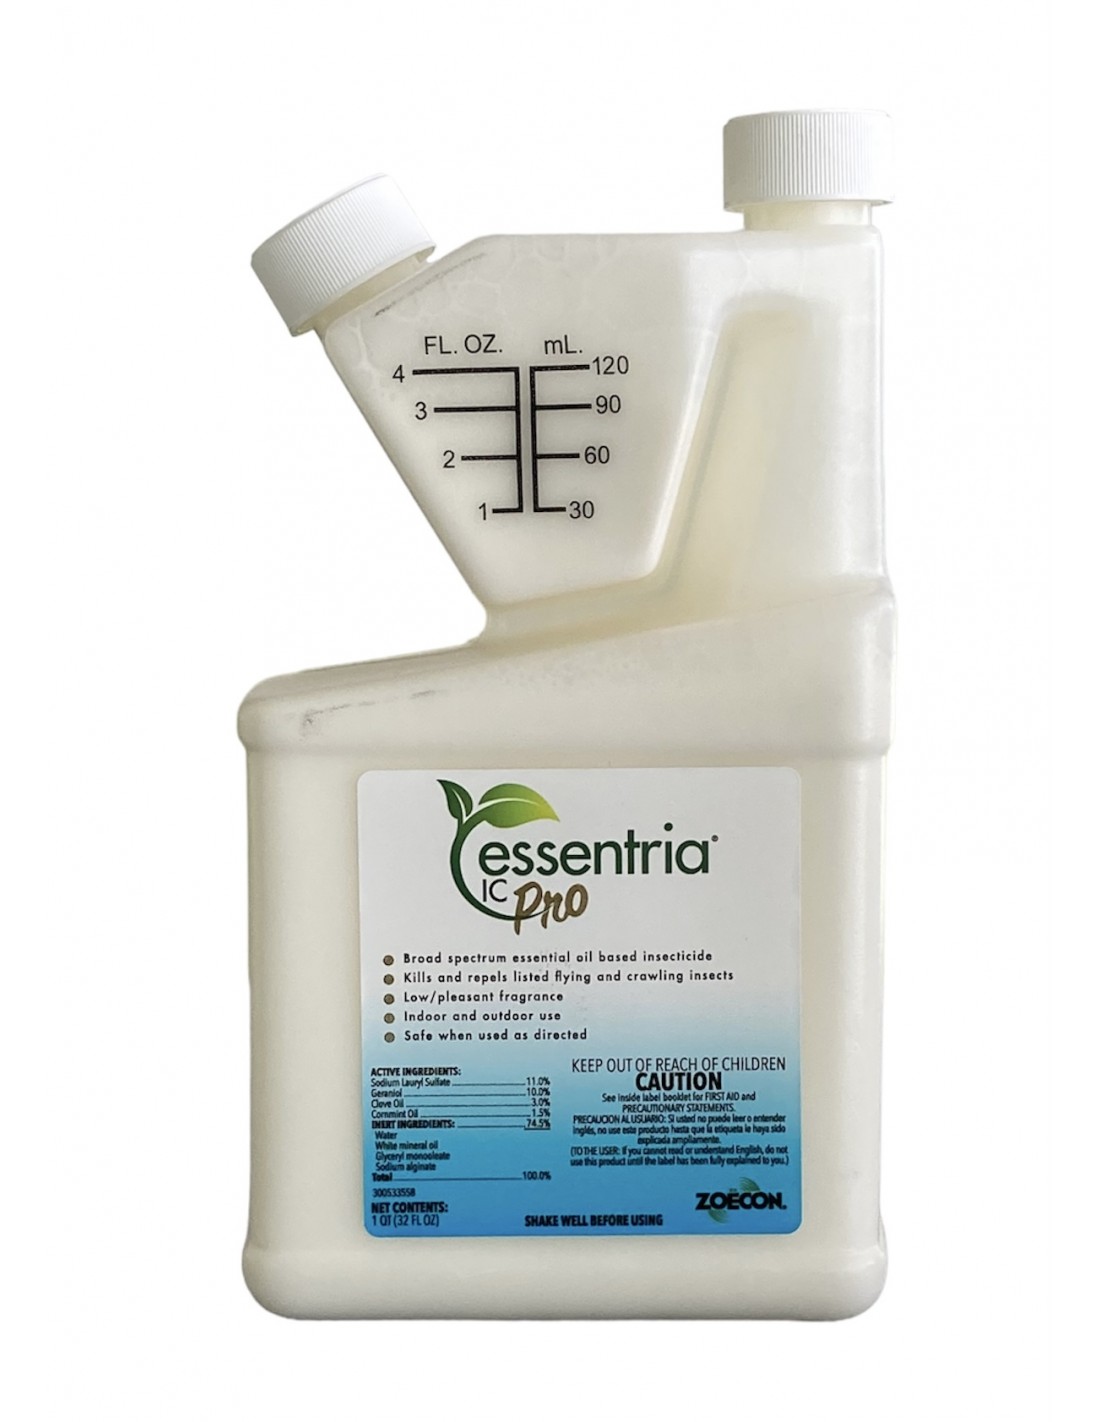 Hello, How much is the shipping cost for buying 1 Gallon of Essentria IC3 Insecticide Concentrate ?  Thanks.